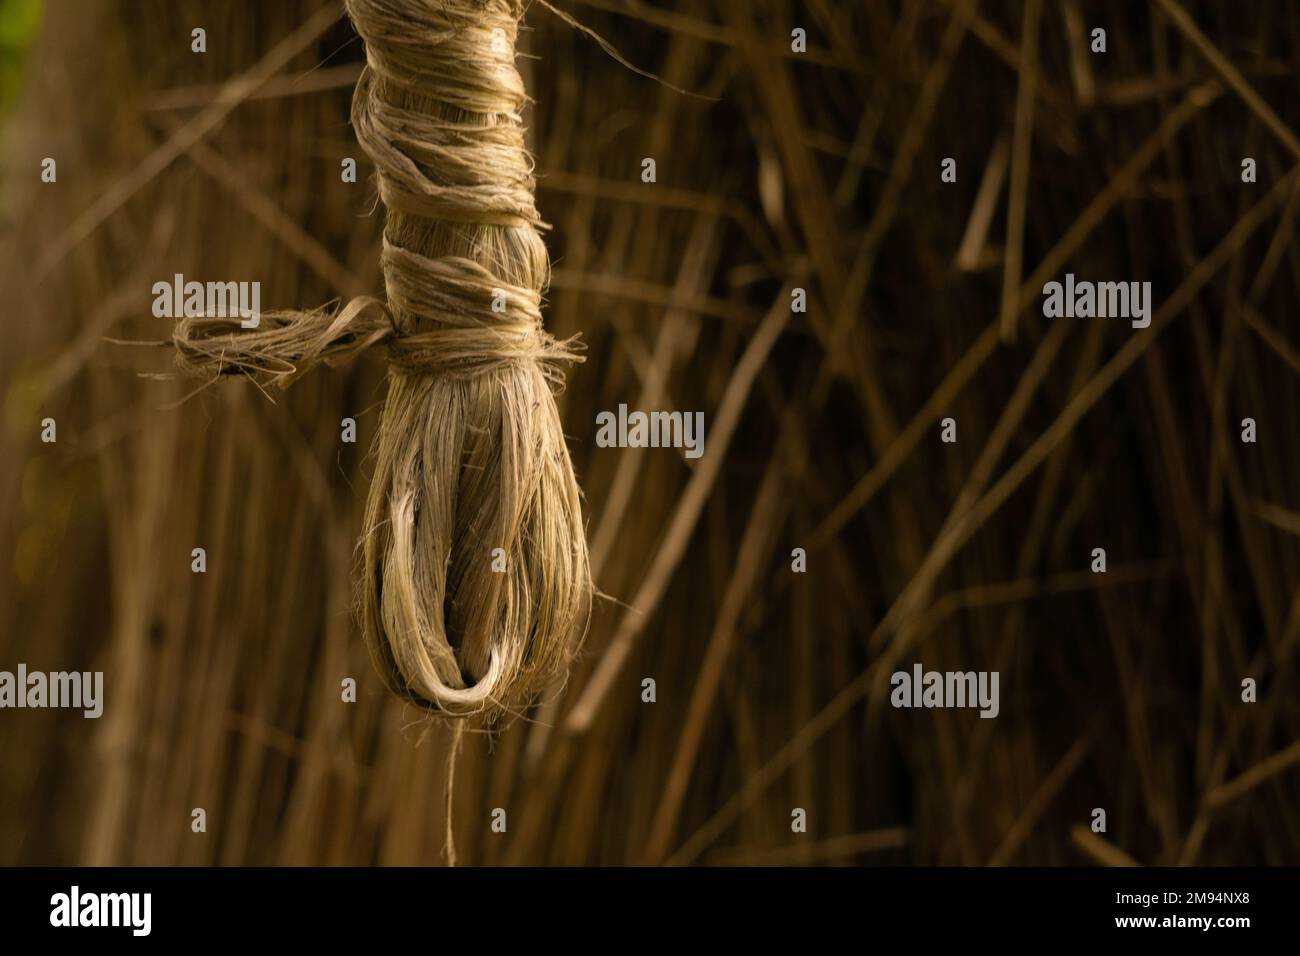 The soaked jute is being dried in the sun. Closeup image of jute. Jute is a type of bast fiber plant. Jute is the main cash crop in Bangladesh. Stock Photo